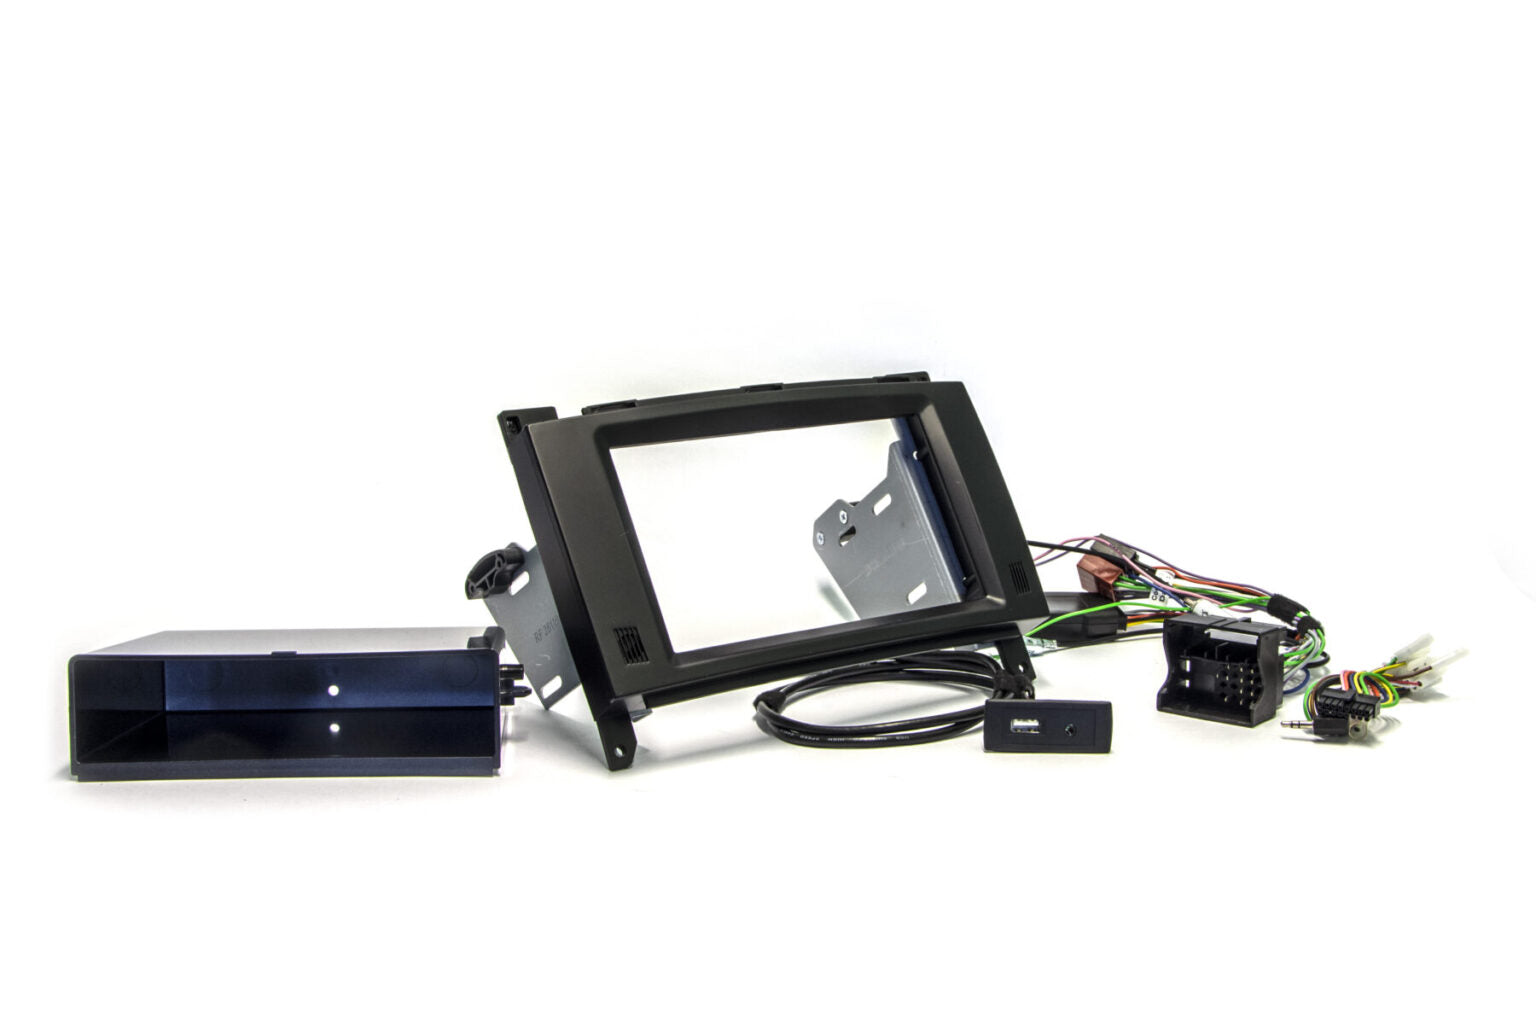 Vito 2014-&gt; (W447) 1-DIN / 2-DIN player mounting kit